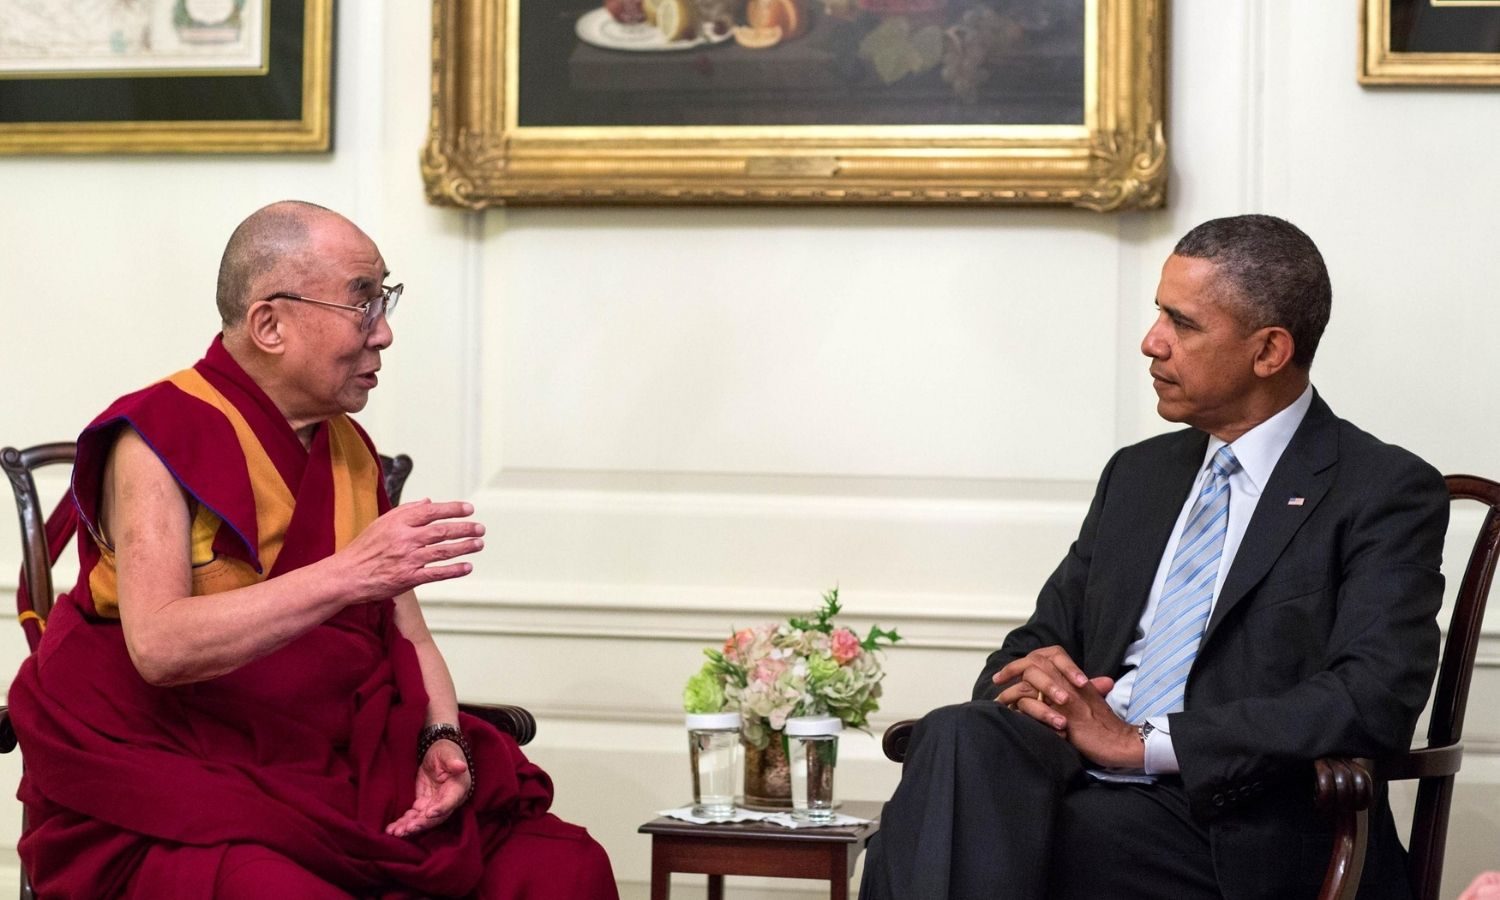 OTD in 2014: US President Barack Obama met with the Dalai Lama amid warnings from China.